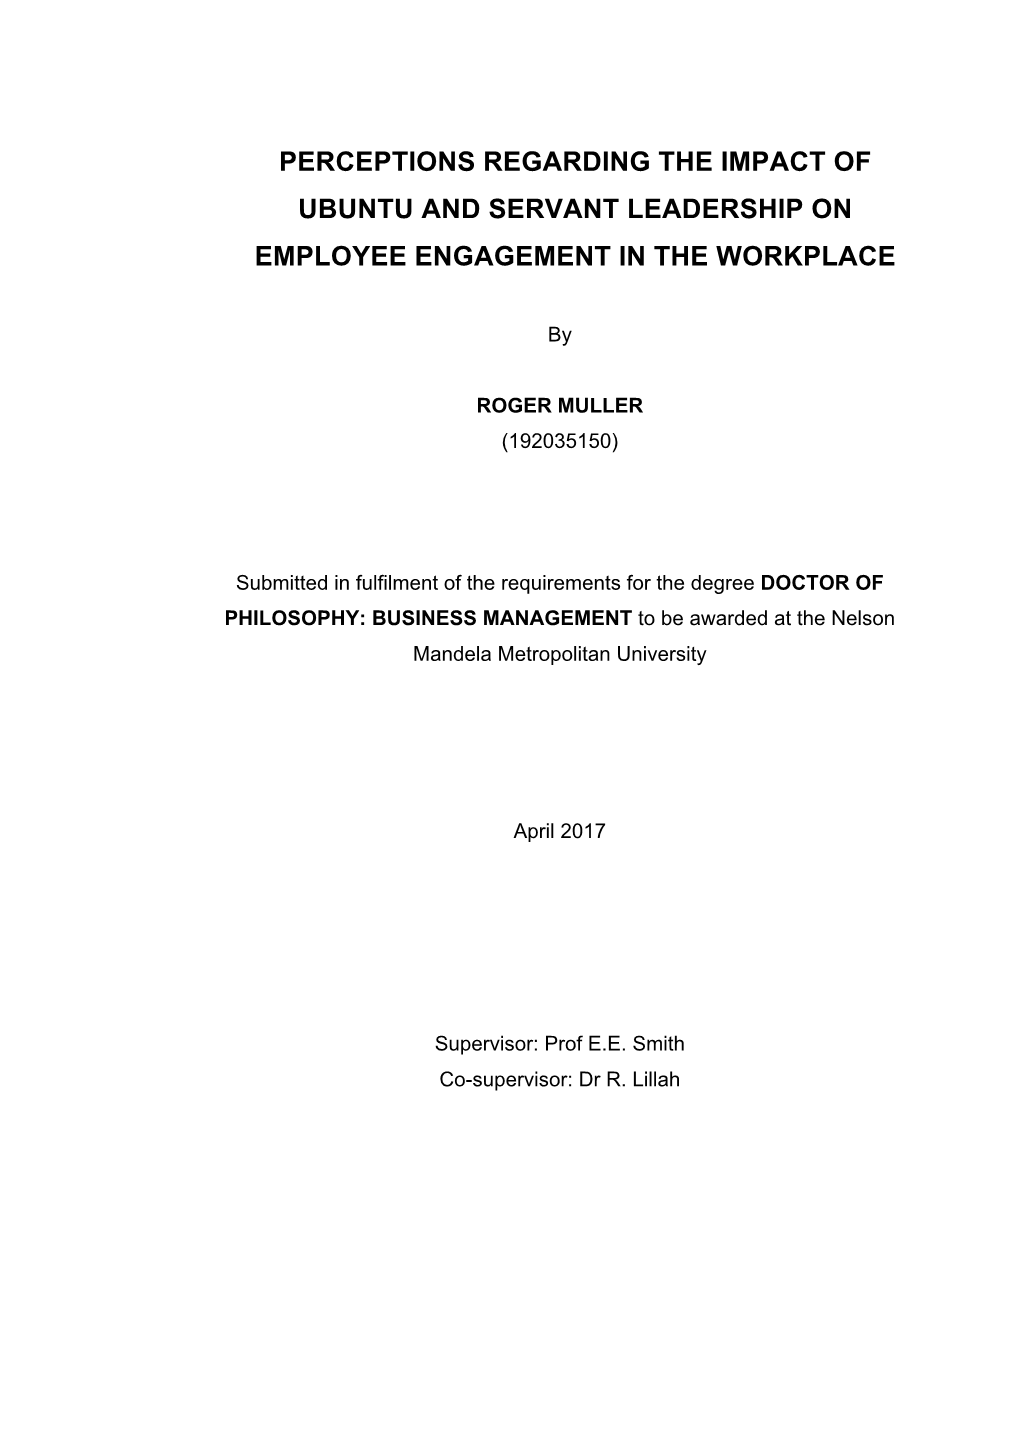 Perceptions Regarding the Impact of Ubuntu and Servant Leadership on Employee Engagement in the Workplace